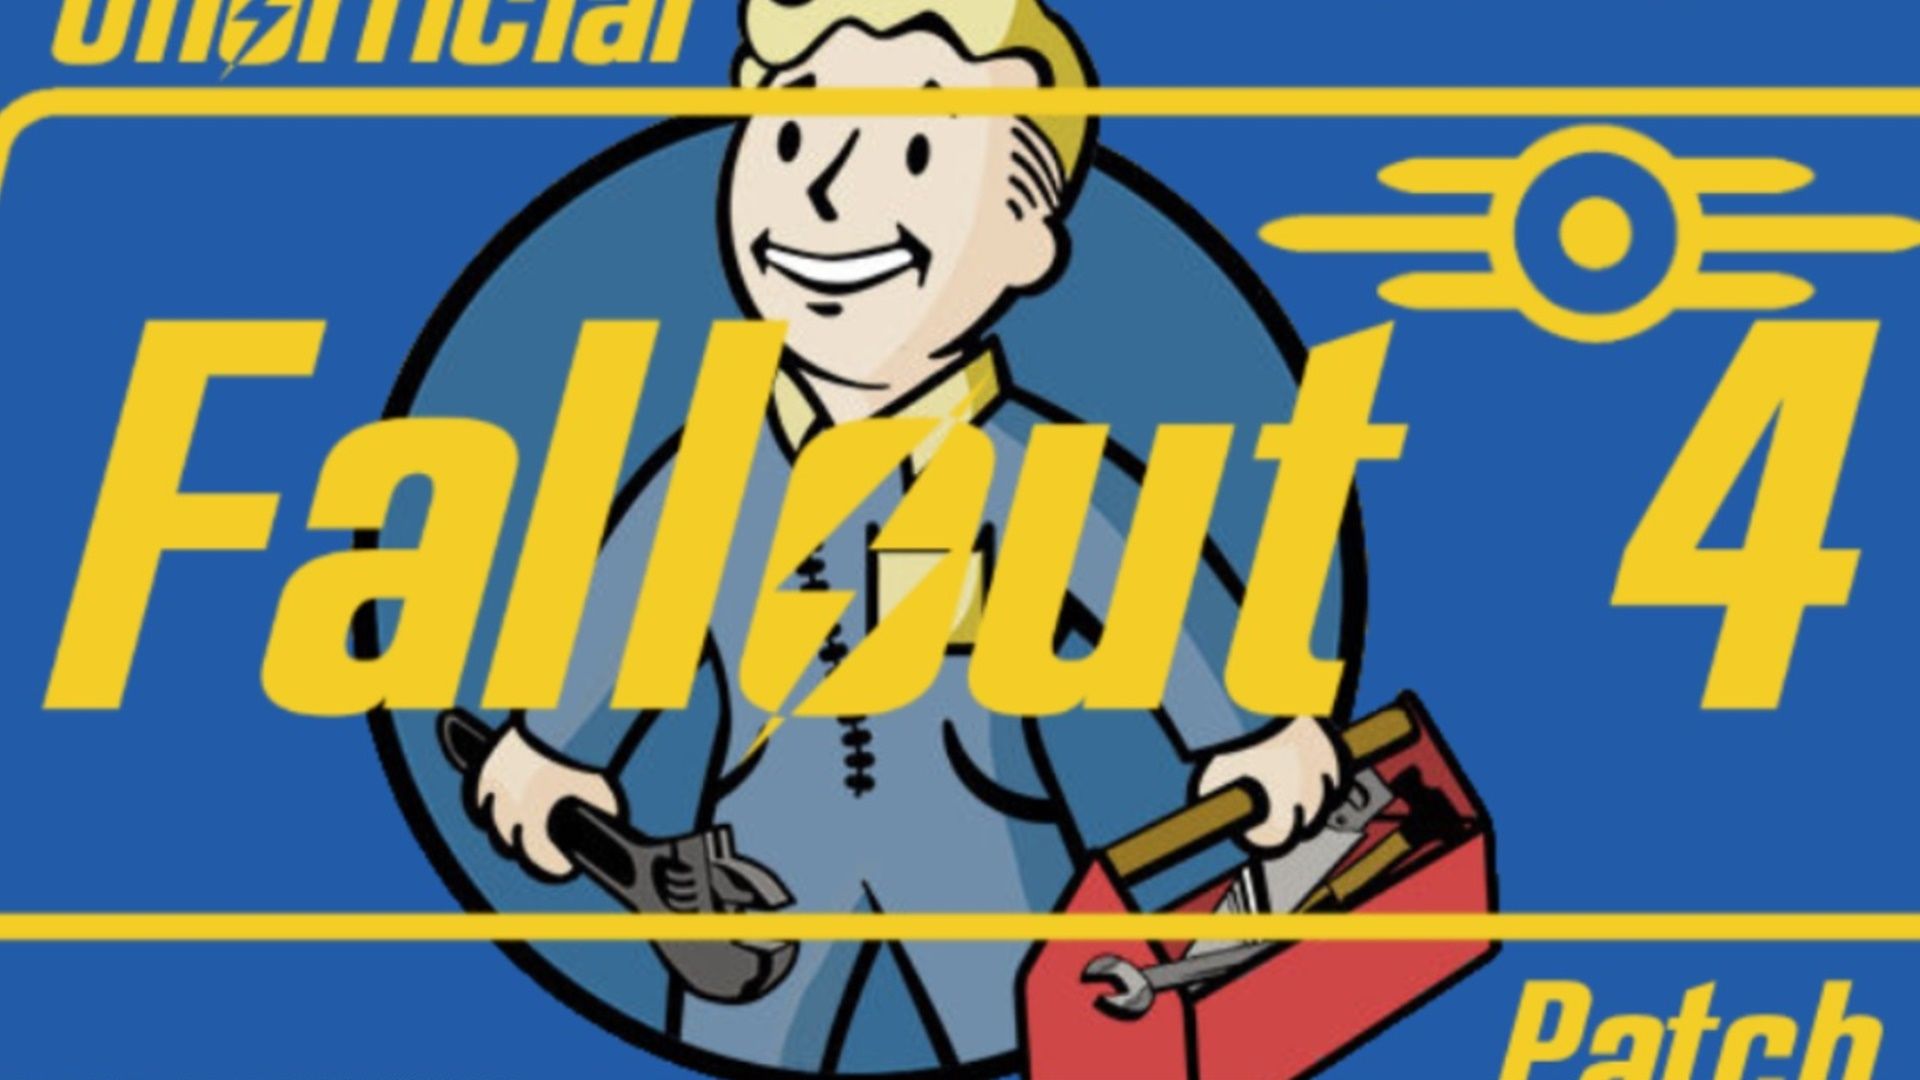 Fallout 3 Face & Hair, Mods & Textures! Little Something For Anyone! –  LOYAL K.N.G.